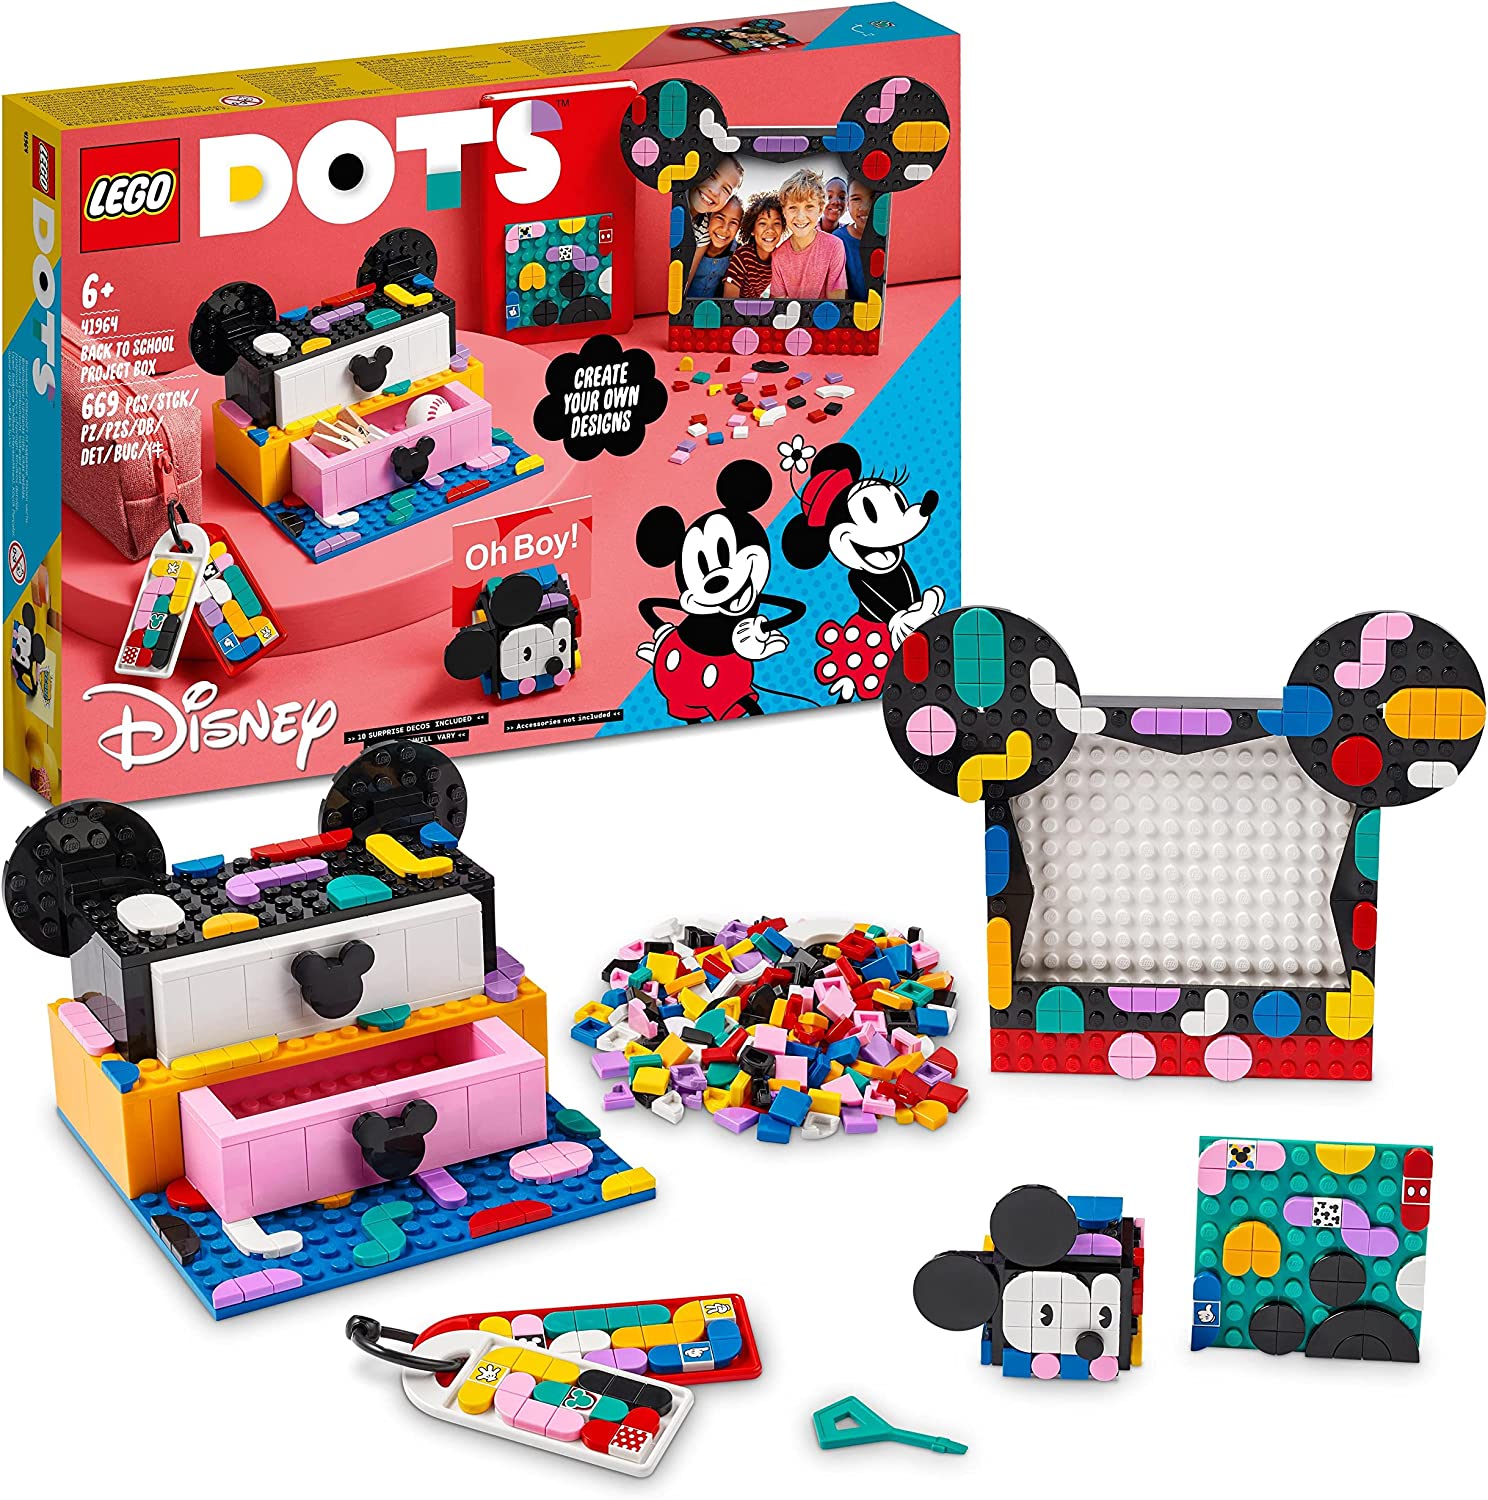 LEGO 41964 DOTS Mickey & Minnie Creative Box for Back to School, 6-in-1 Craft Set with Bag Tags, Stickers and Office Set, Gift Idea for Children